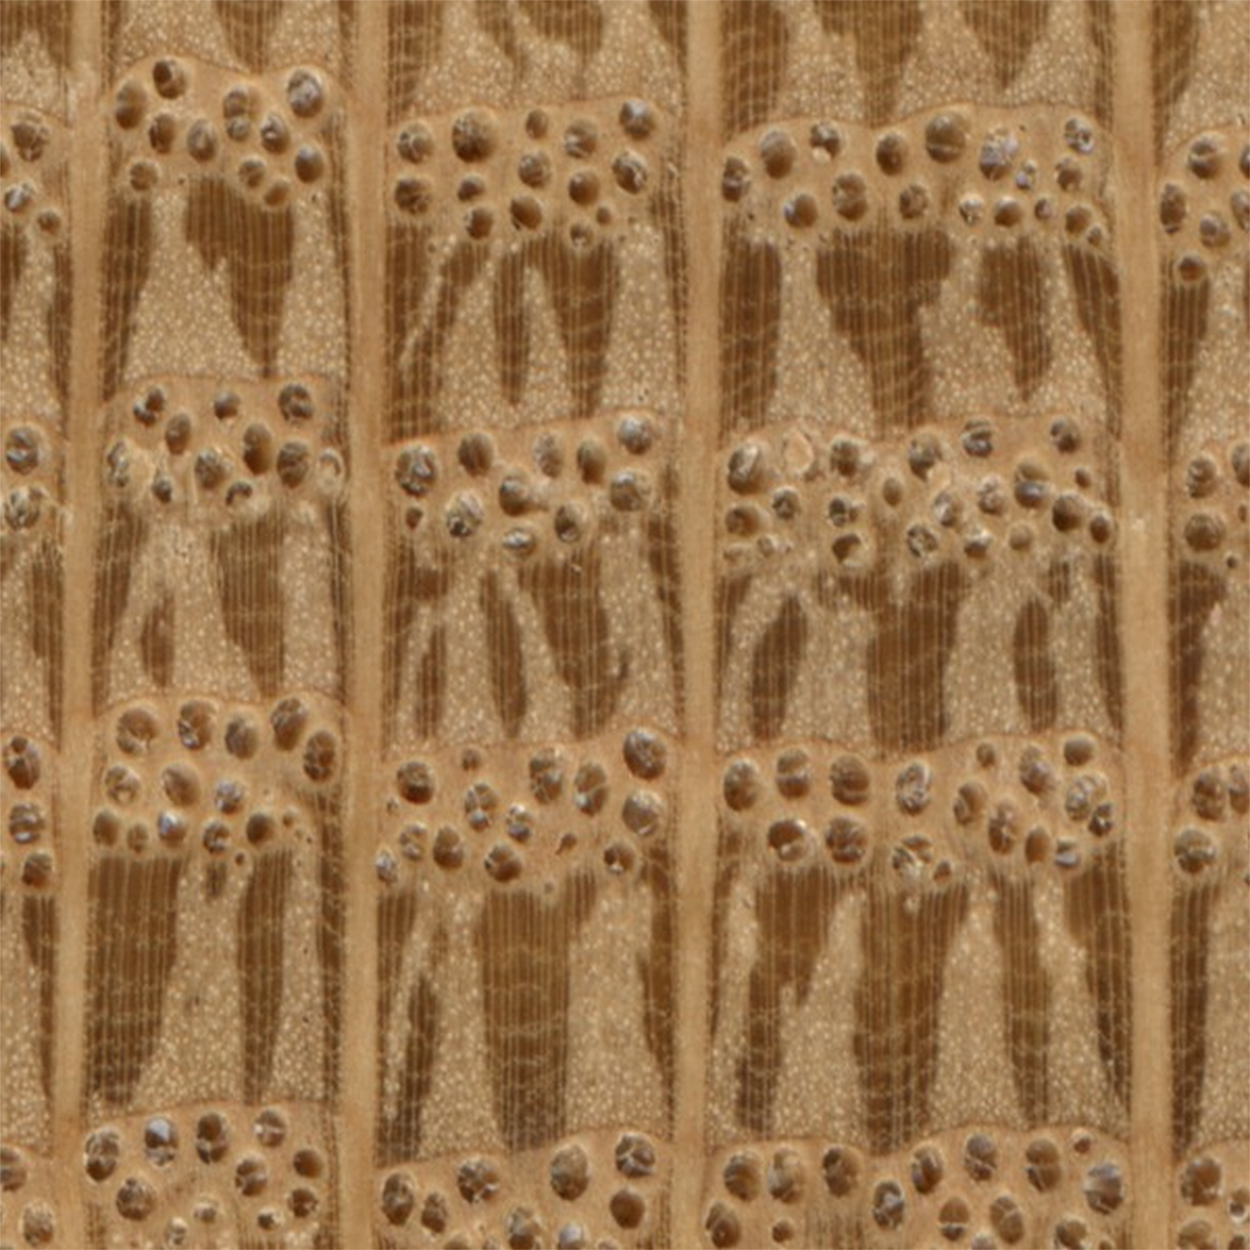 Cross section of American white oak showing tyloses and medullary rays